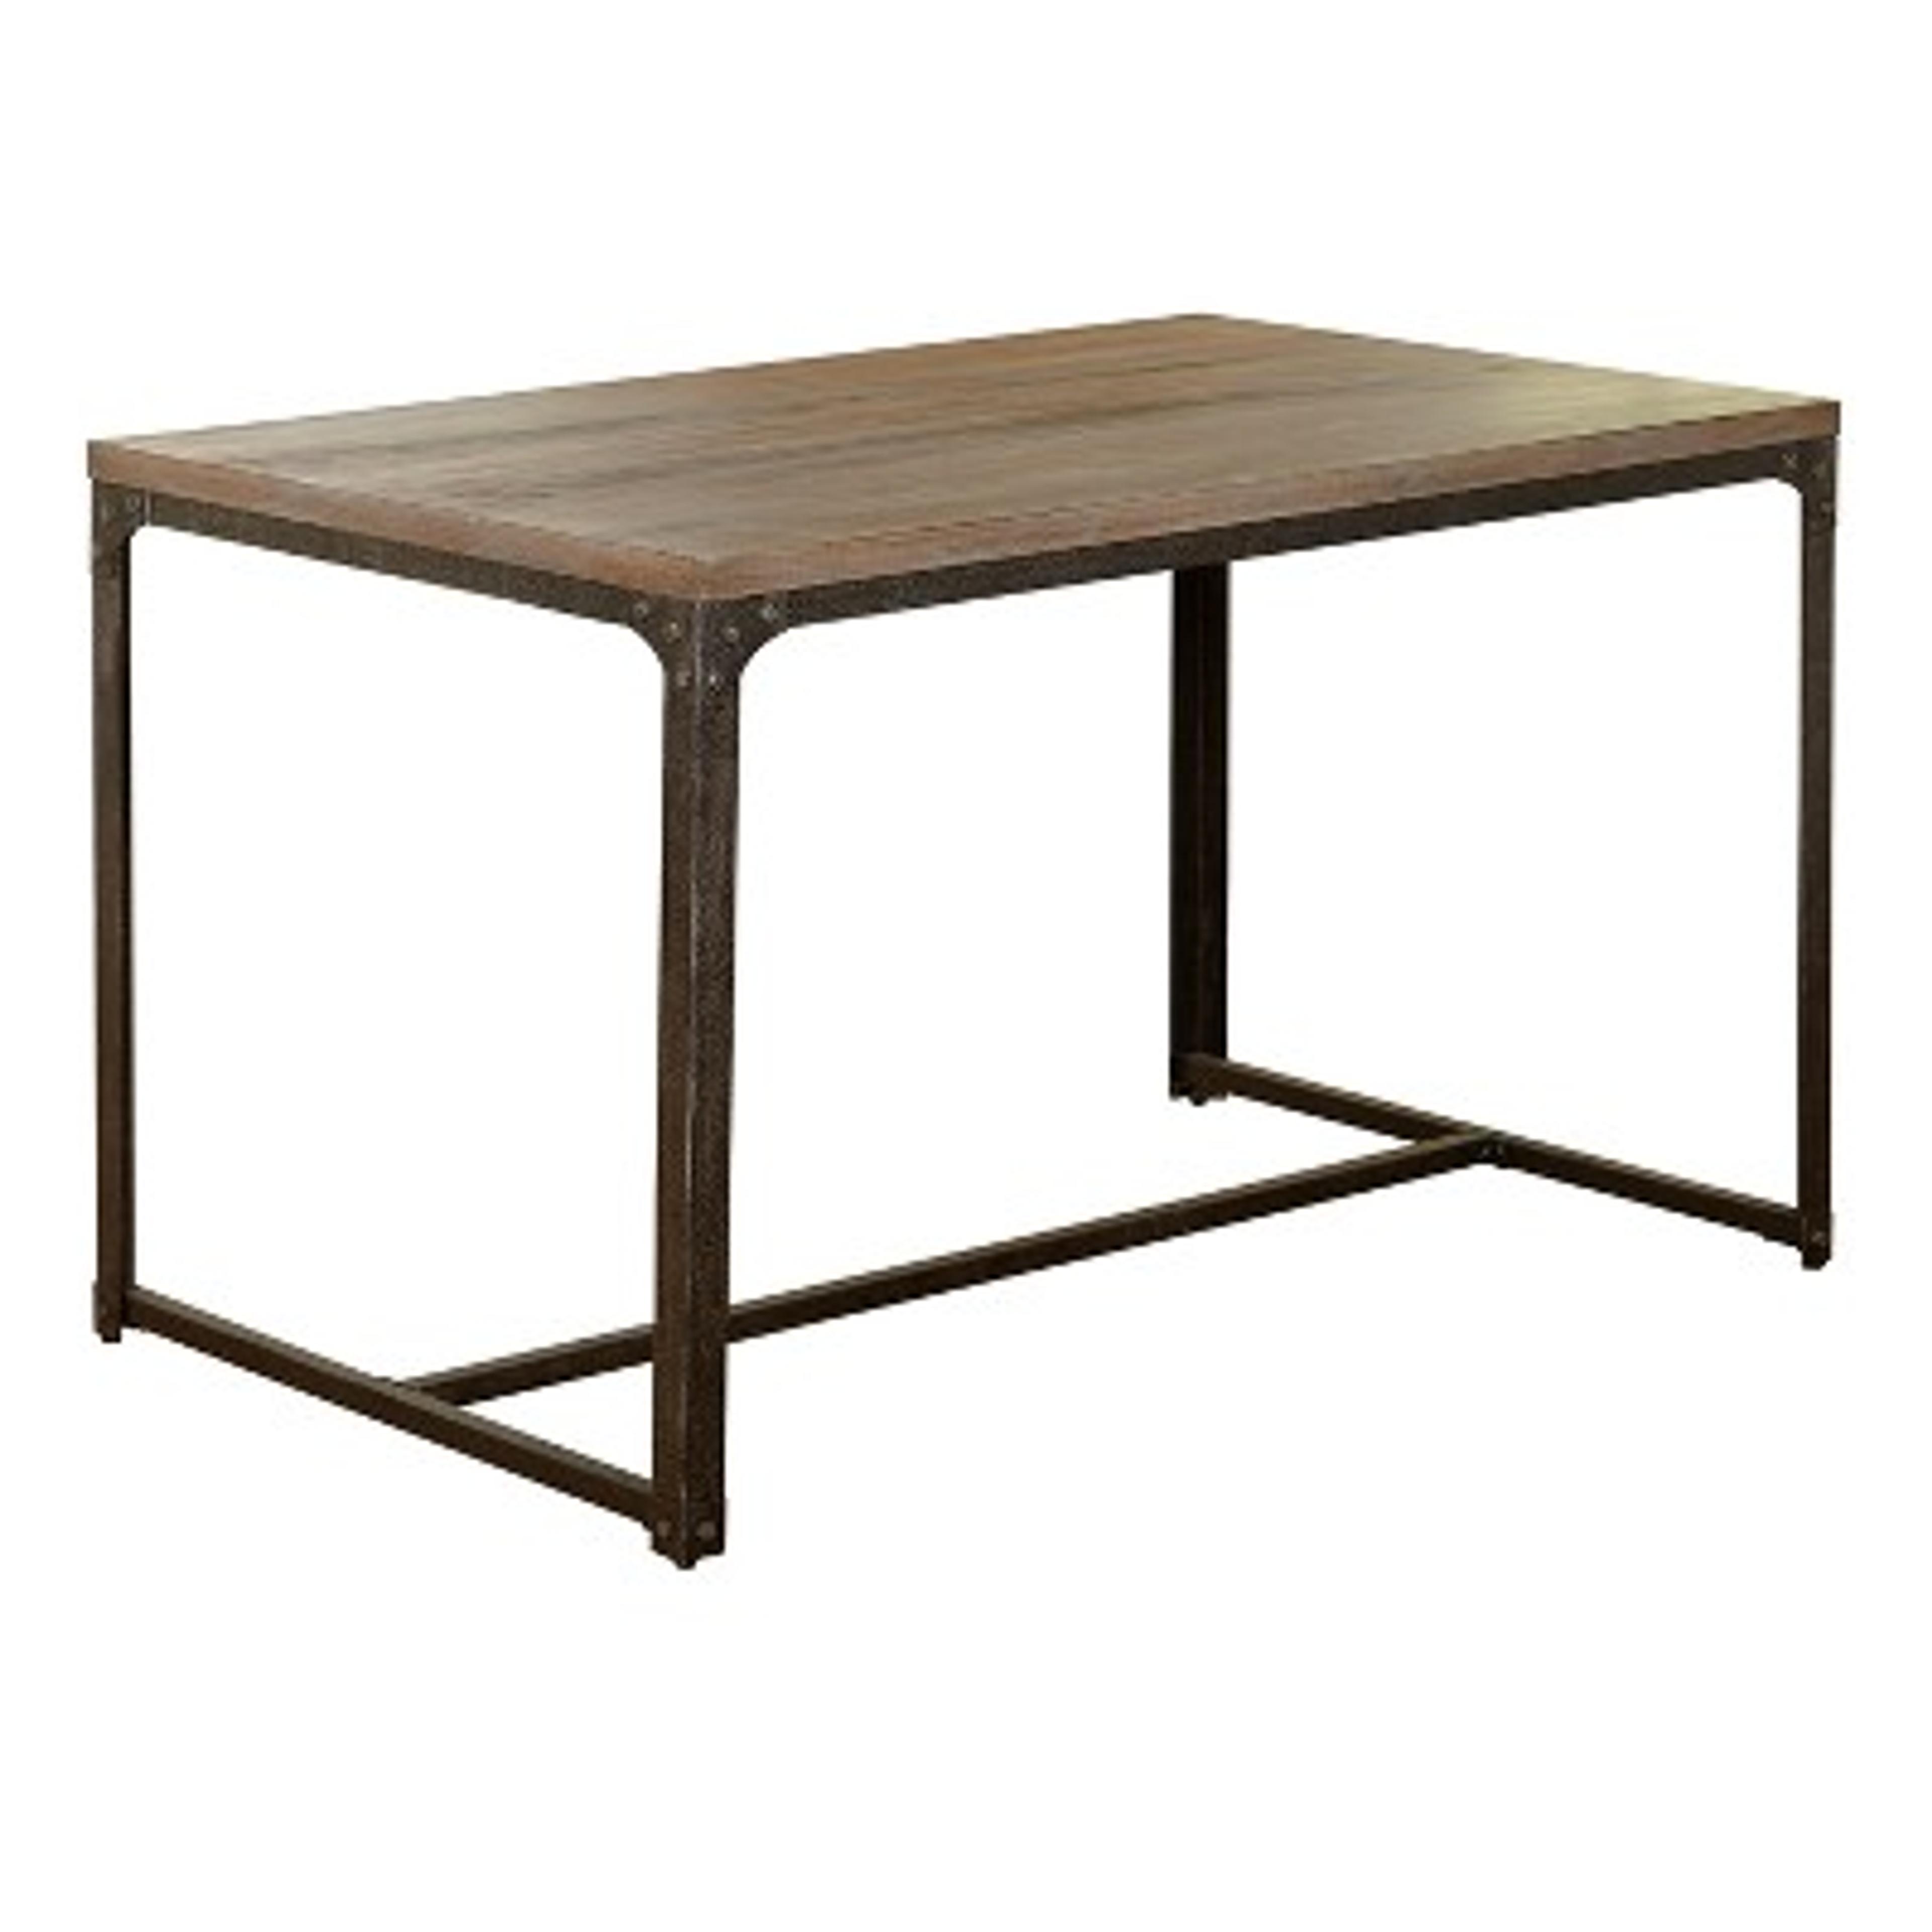 Scholar Vintage Industrial Dining Table Gray - Buylateral